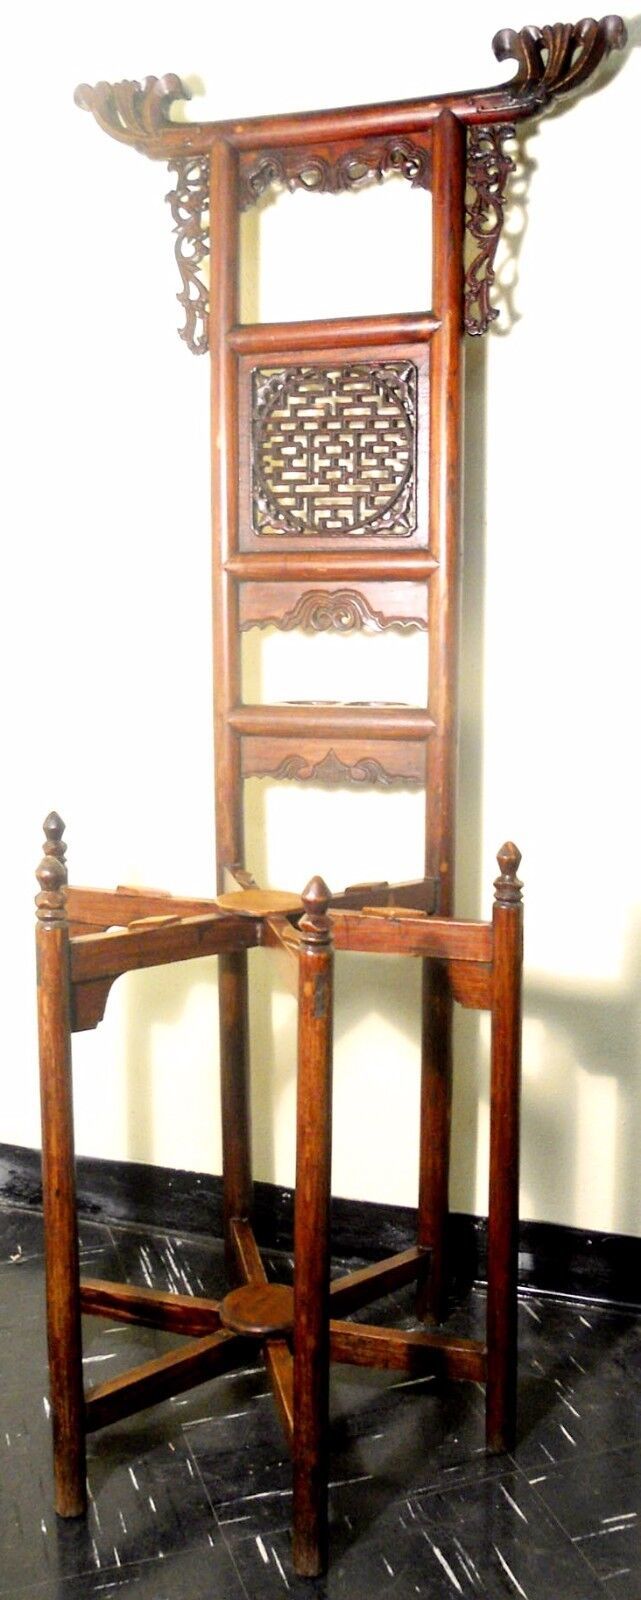 Primary image for Antique Chinese Wash Stand (2577), Circa 1800-1849